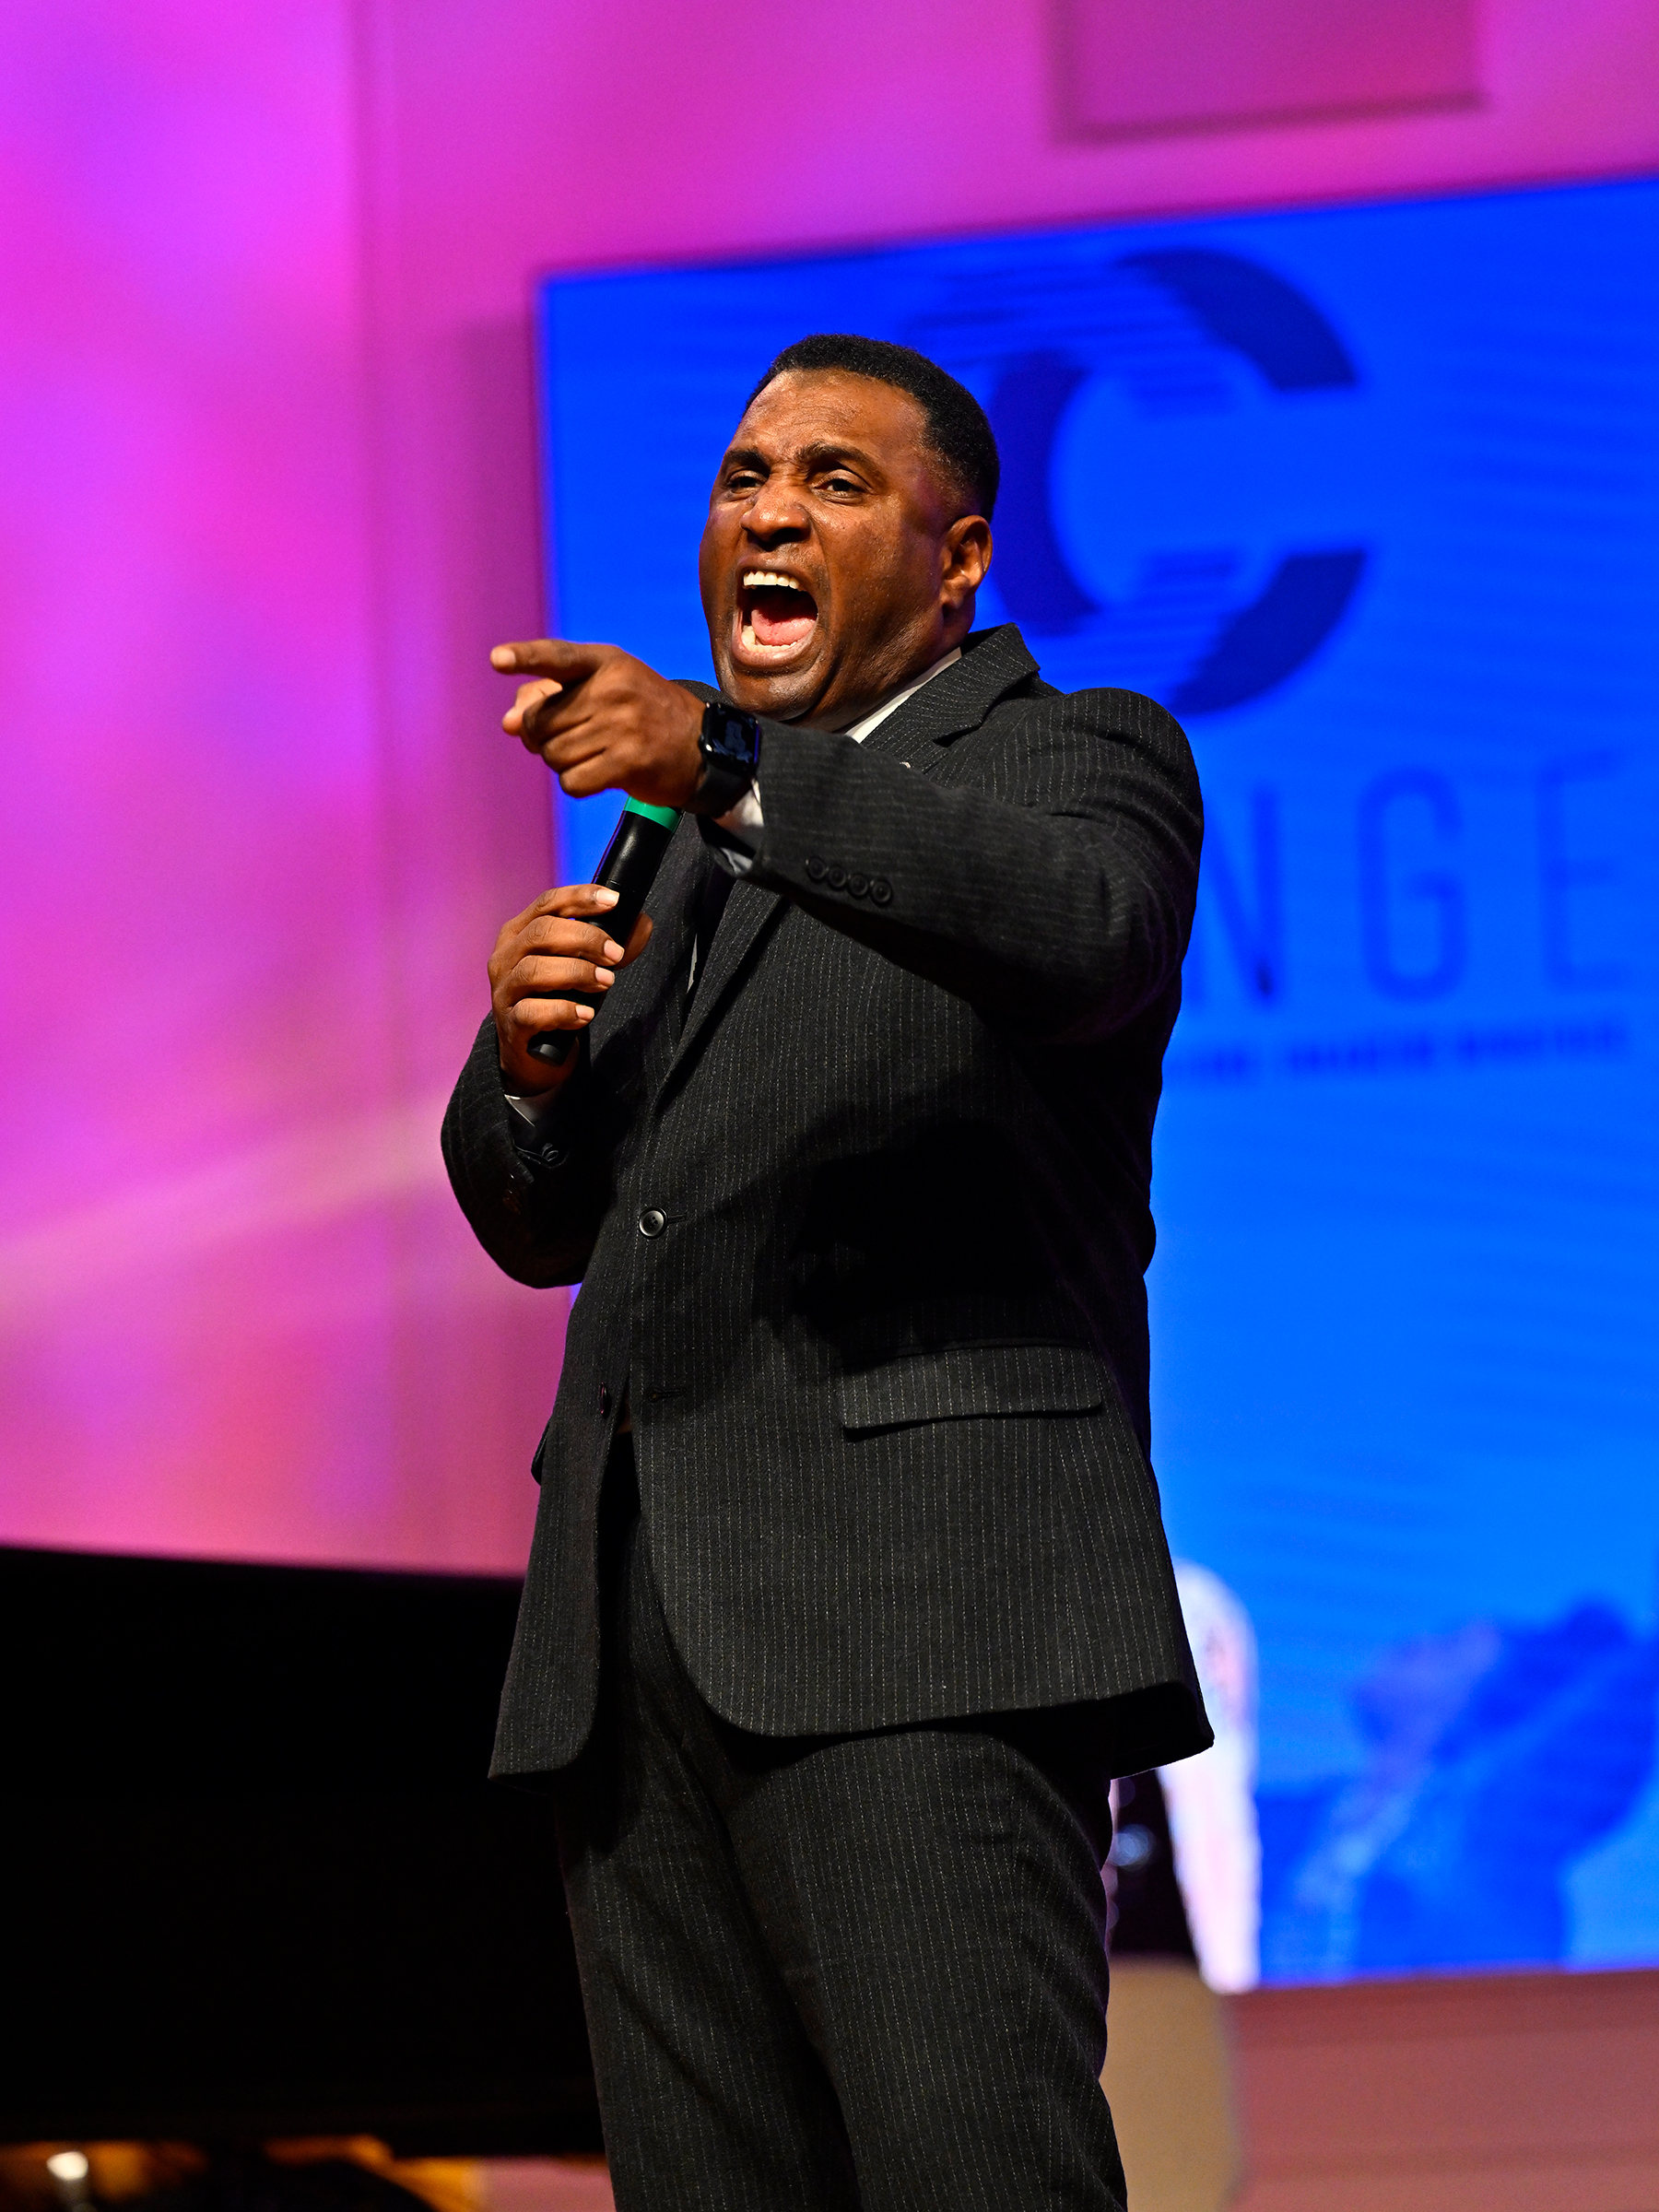 Black man on stage preaching, with his arm out and finger pointing.